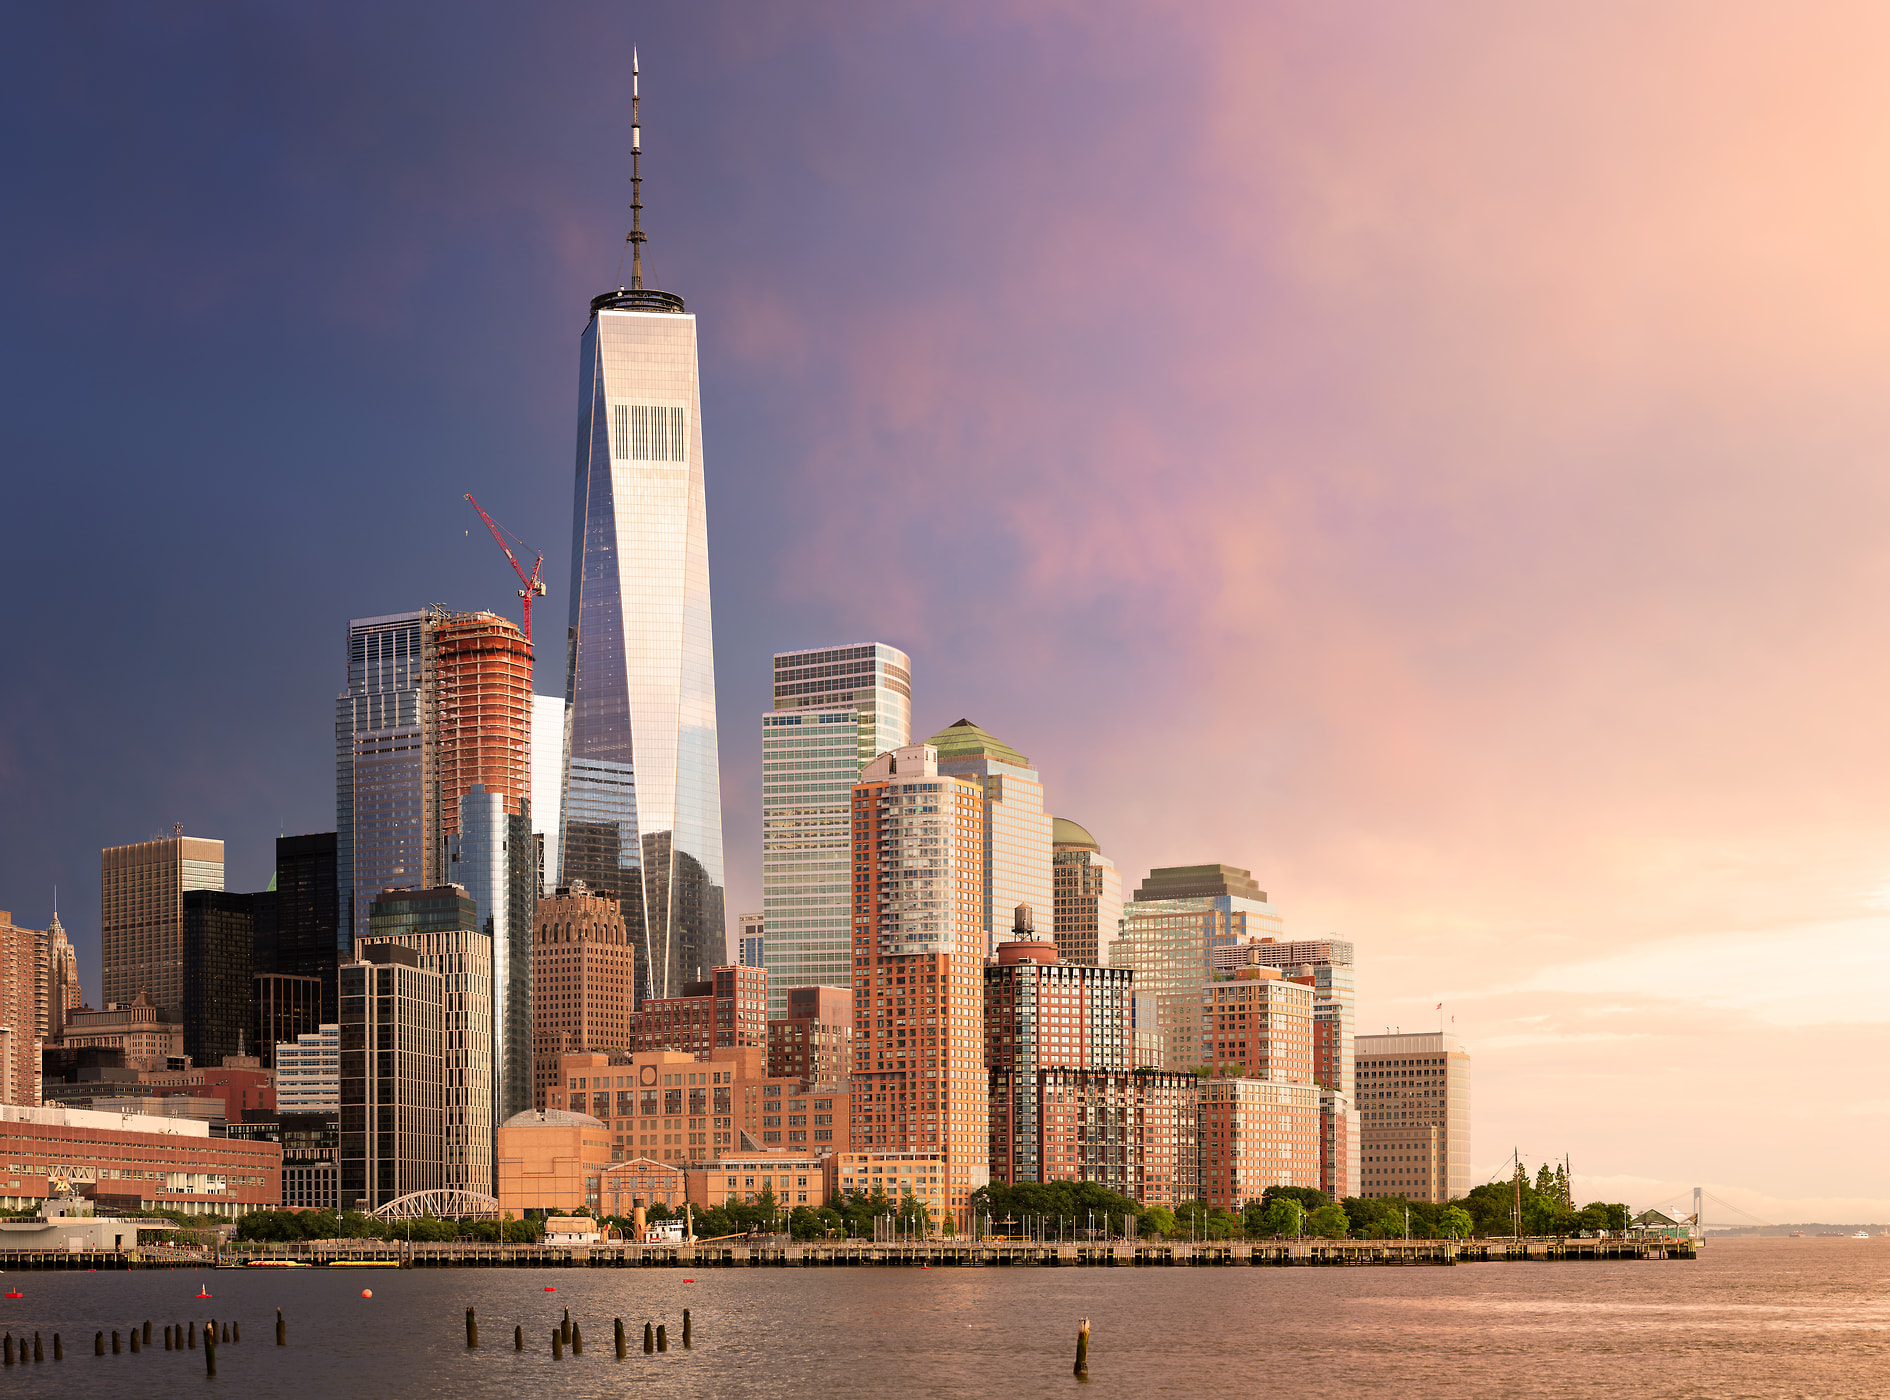 759 megapixels! A very high resolution, large-format VAST photo of the World Trade Center and Battery Park City at sunset; fine art skyline photo created by cityscape photographer Dan Piech in New York City.